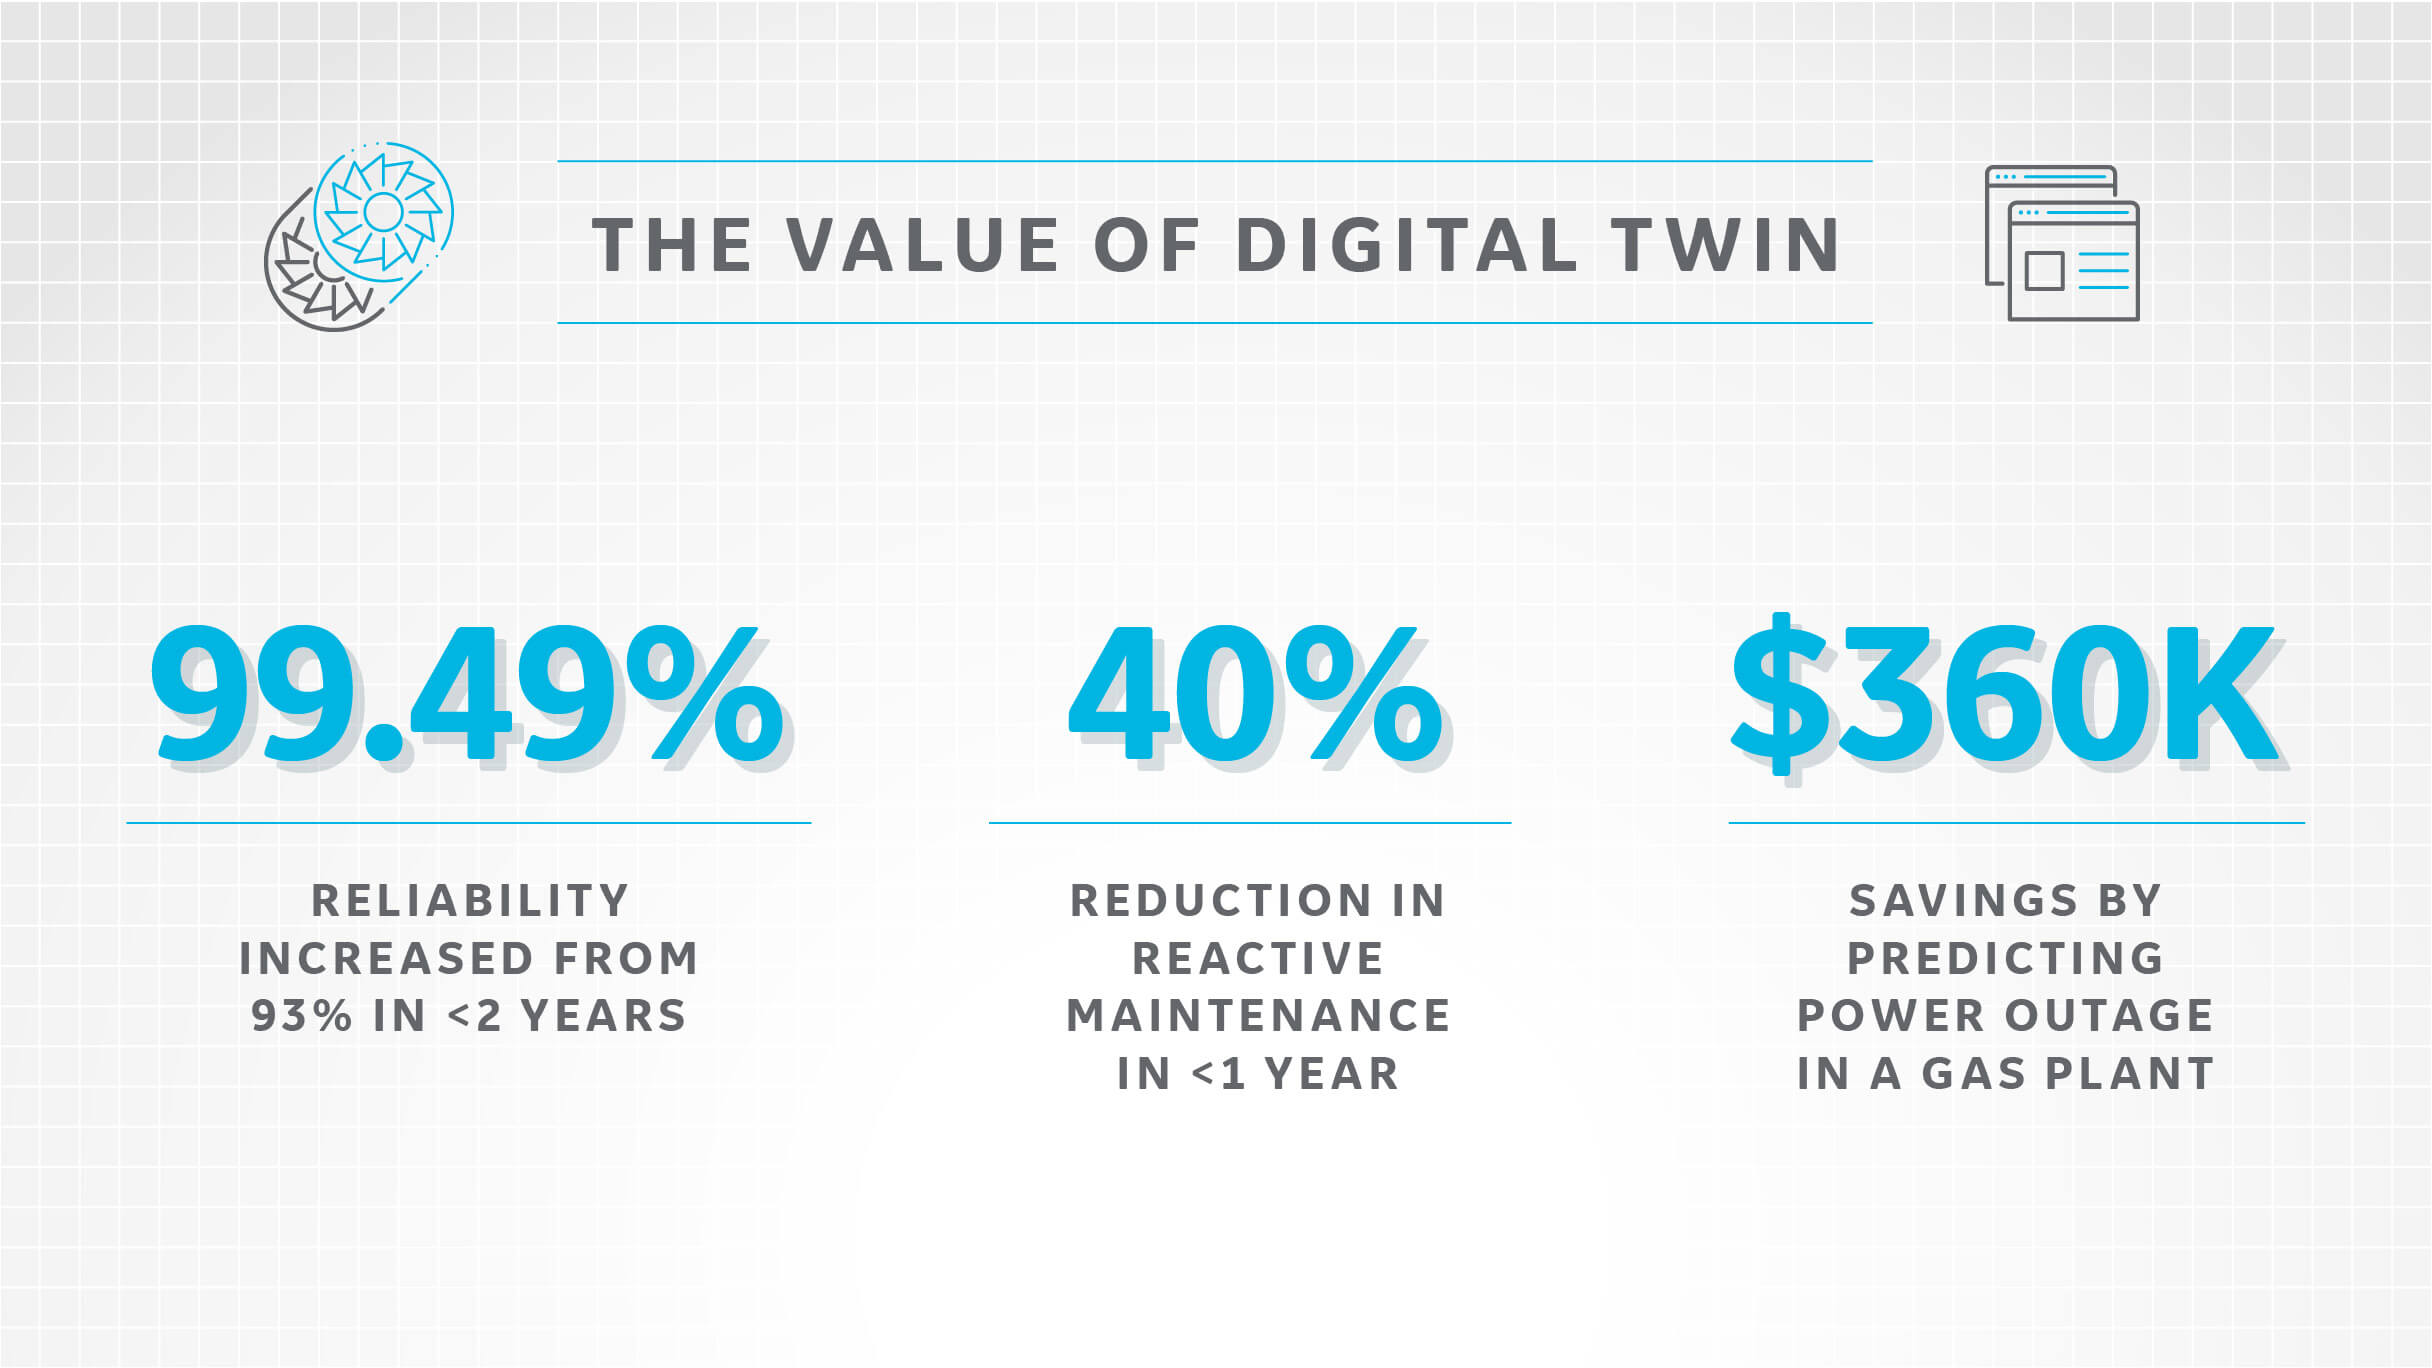 The value of digital twin